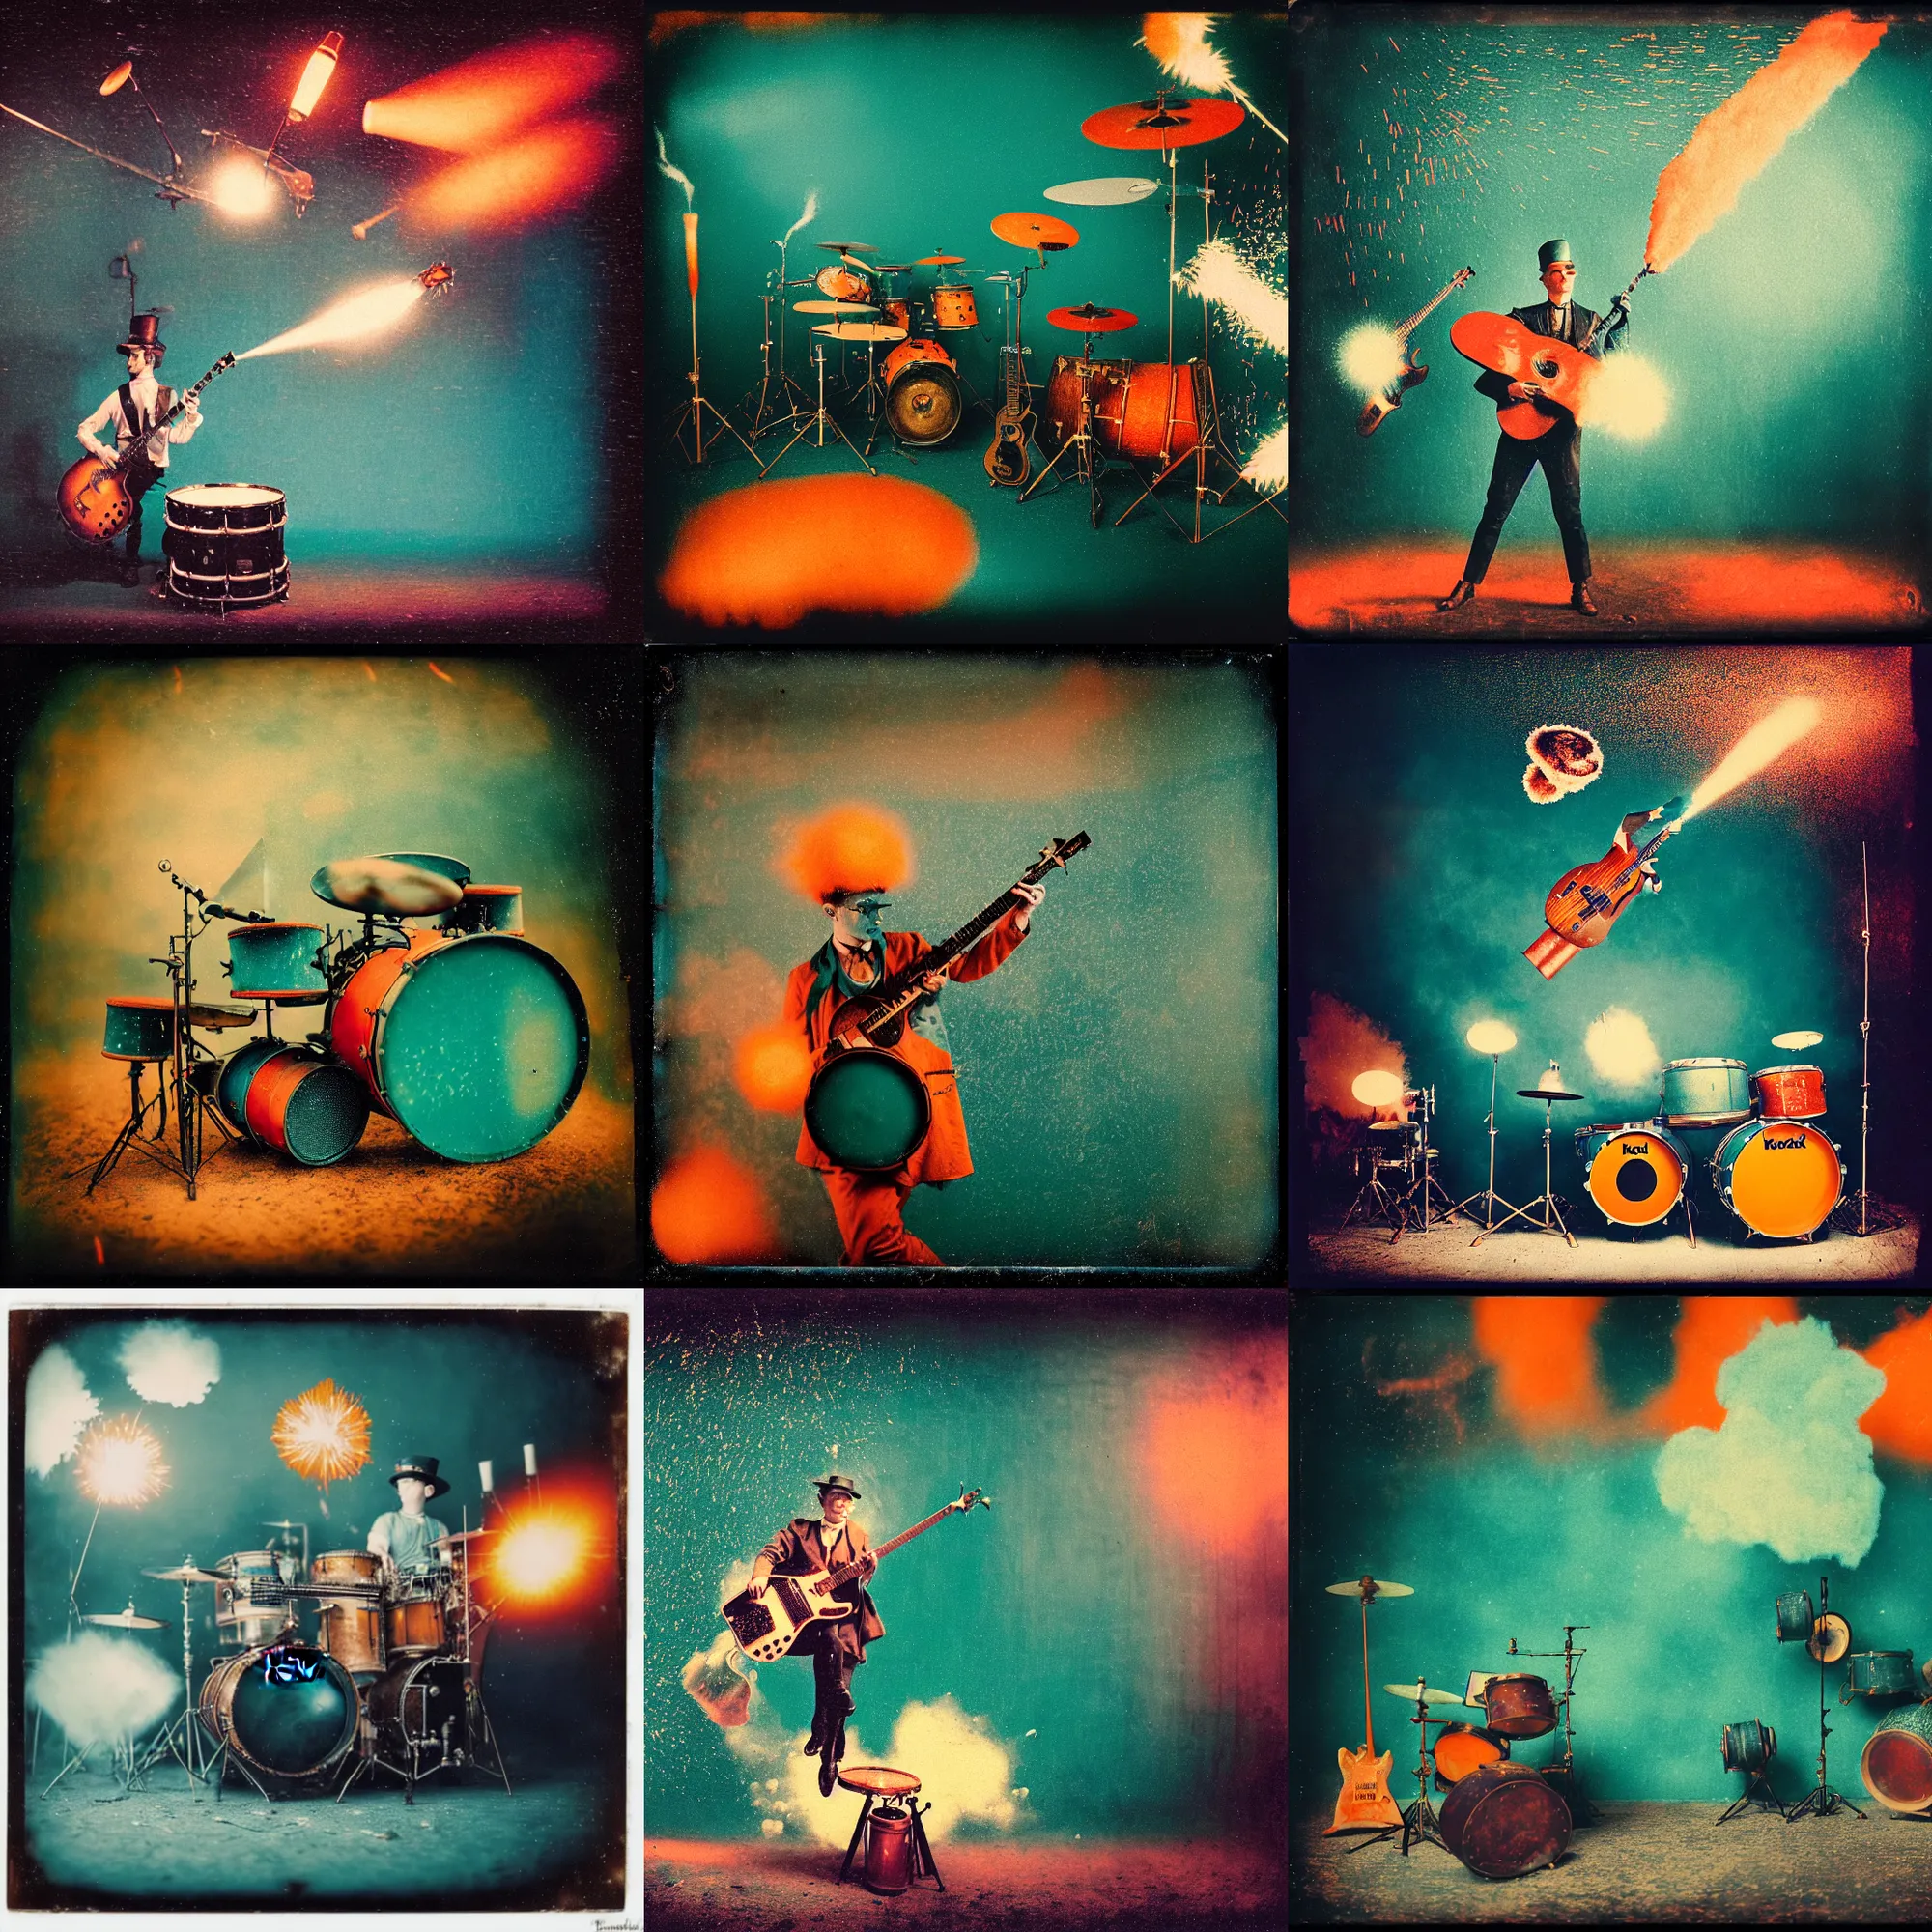 Prompt: kodak portra 4 0 0, wetplate, muted colours, teal orange, drum set, guitar, bass, 1 9 2 0 s style, motion blur, portrait photo of a backdrop, explosions, rockets, bombs, sparkling, stargazer, snow, fog, steampunk, by georges melies and by britt marling